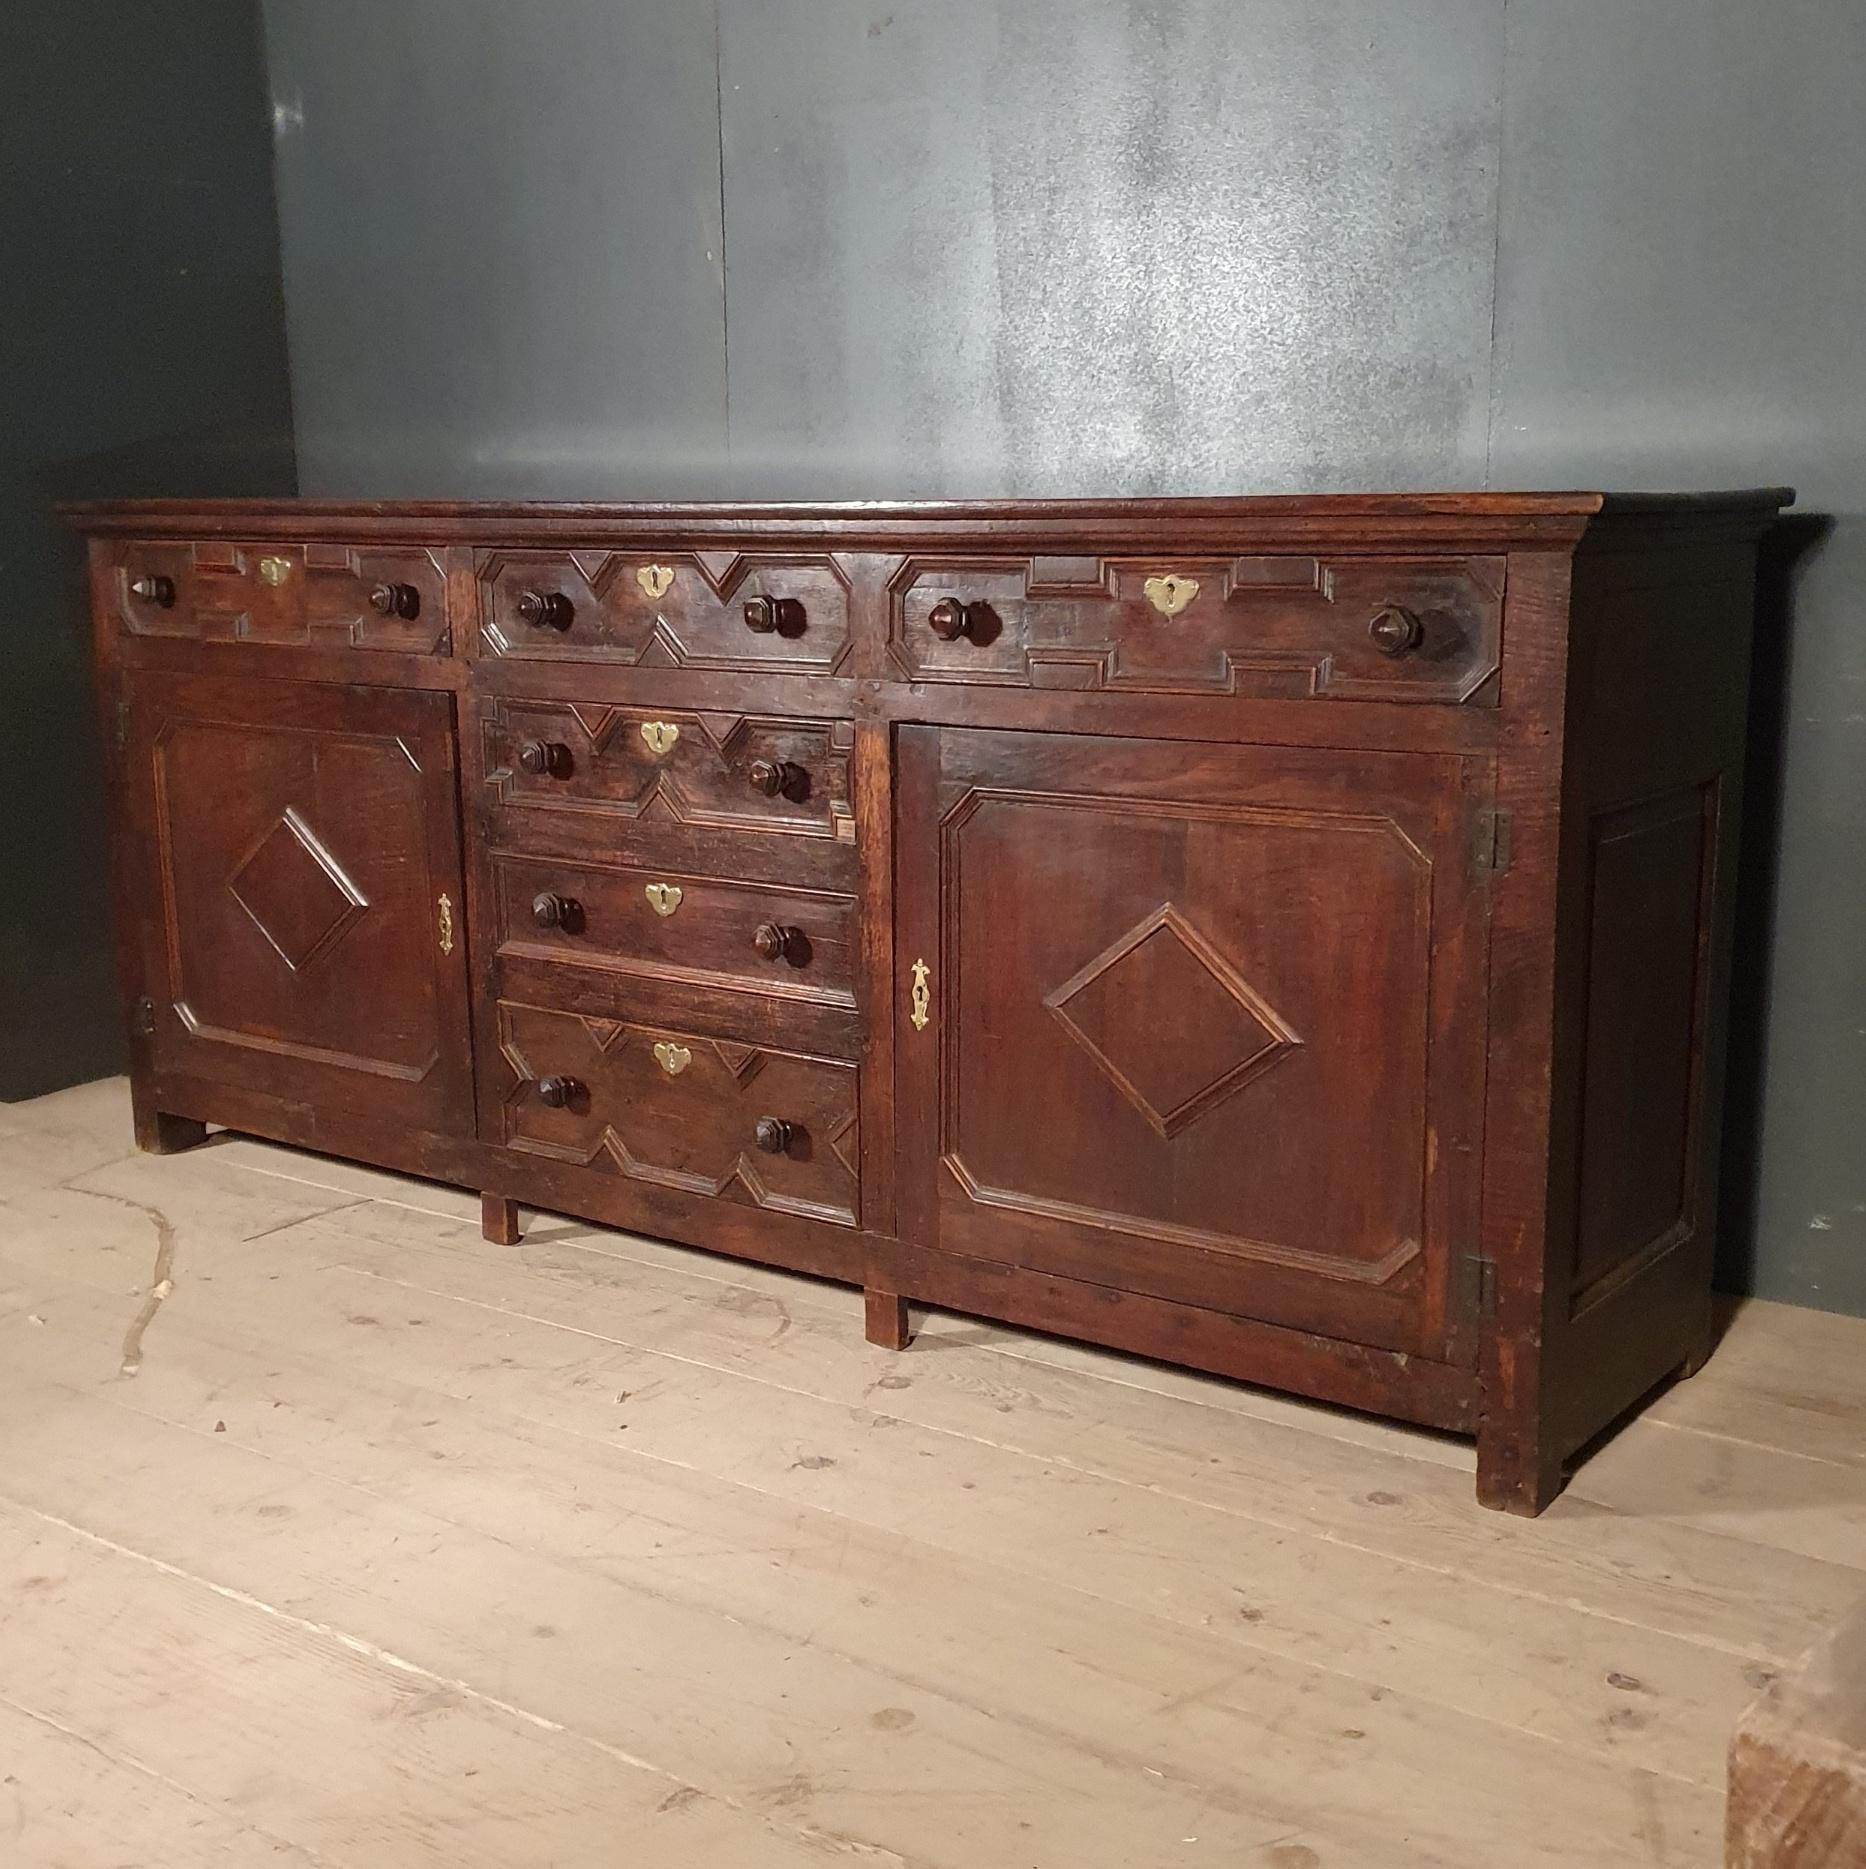 Huge early 18th century country house oak dresser base. Really good color, 1730.

Dimensions
89.5 inches (227 cms) wide
21.5 inches (55 cms) deep
38 inches (97 cms) high.